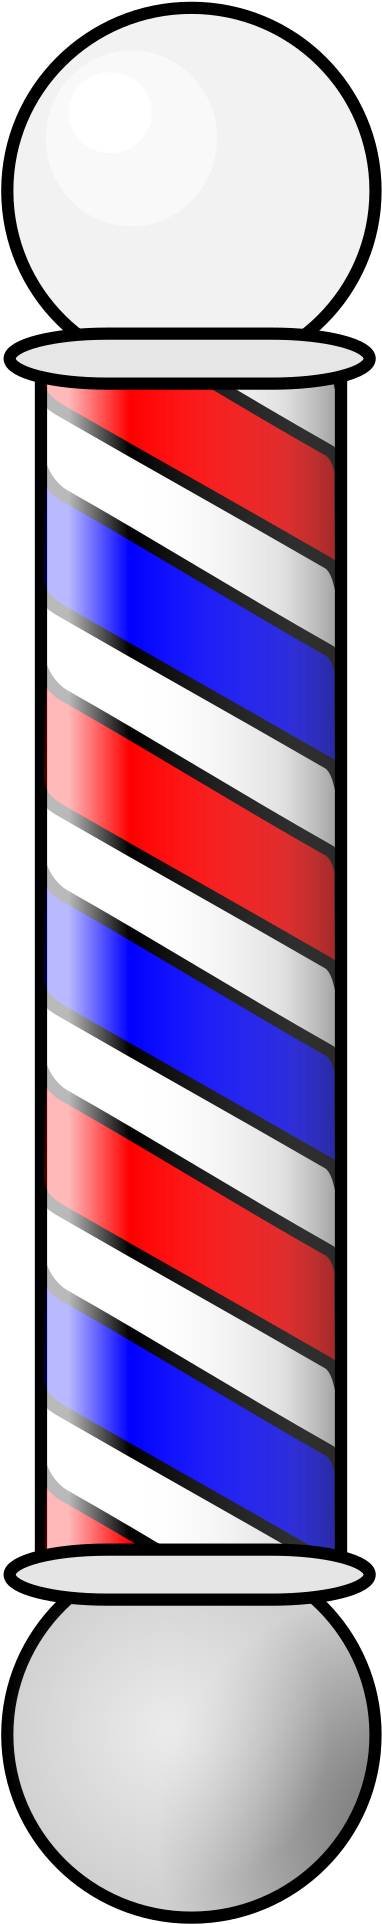 Download Barber Shop Pole Vector at Vectorified.com | Collection of ...